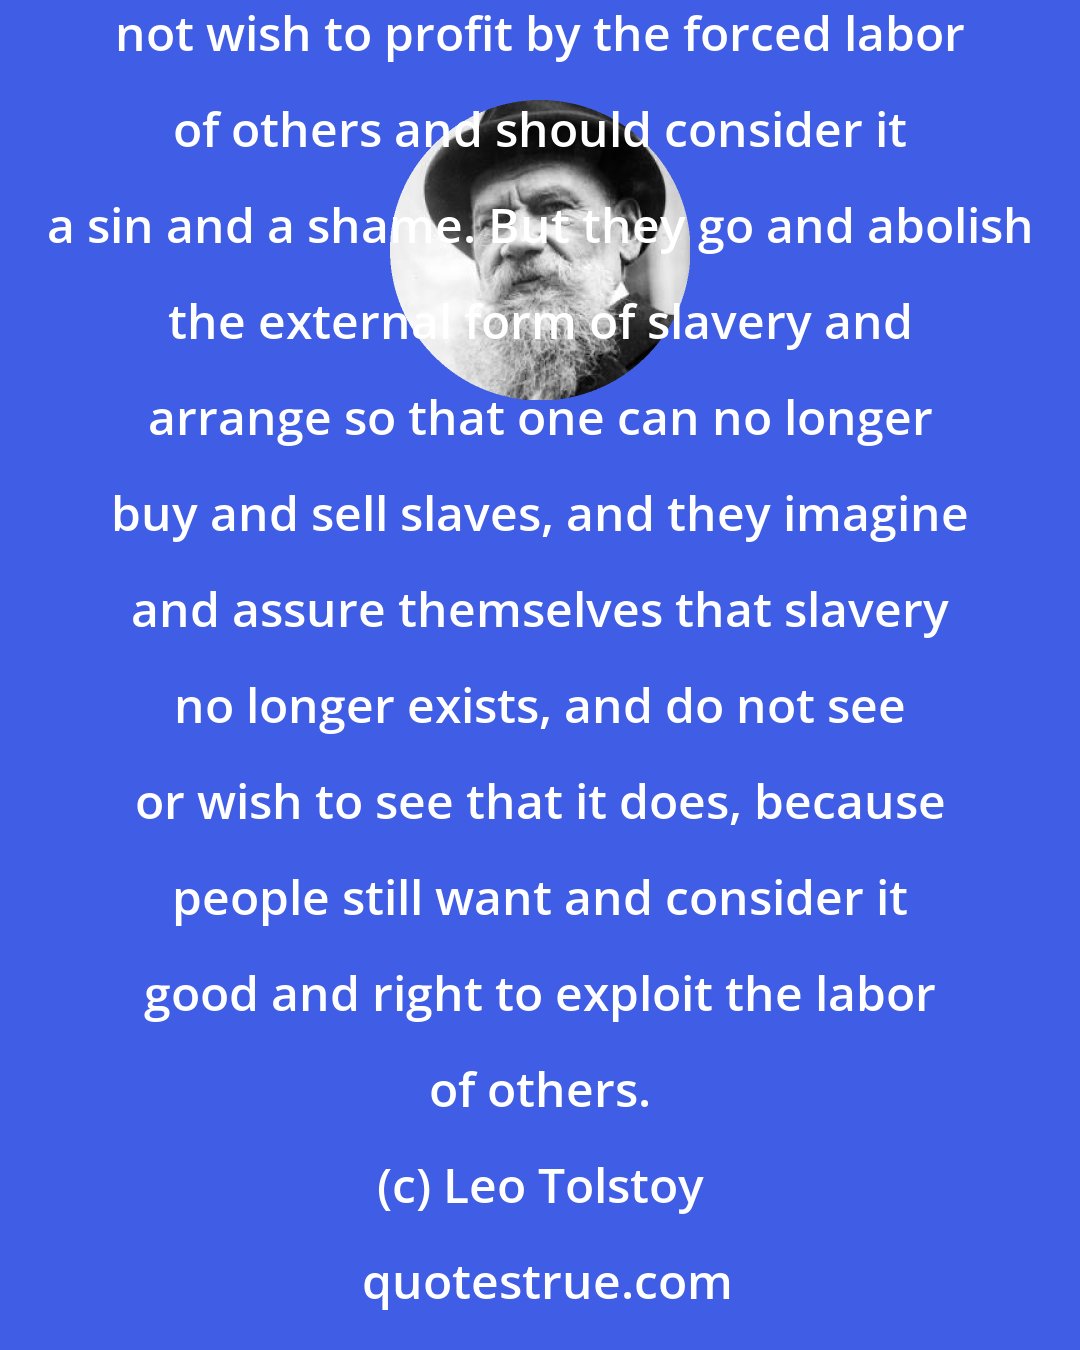 Leo Tolstoy: Slavery, you know, is nothing else than the unwilling labor of many. Therefore to get rid of slavery it is necessary that people should not wish to profit by the forced labor of others and should consider it a sin and a shame. But they go and abolish the external form of slavery and arrange so that one can no longer buy and sell slaves, and they imagine and assure themselves that slavery no longer exists, and do not see or wish to see that it does, because people still want and consider it good and right to exploit the labor of others.